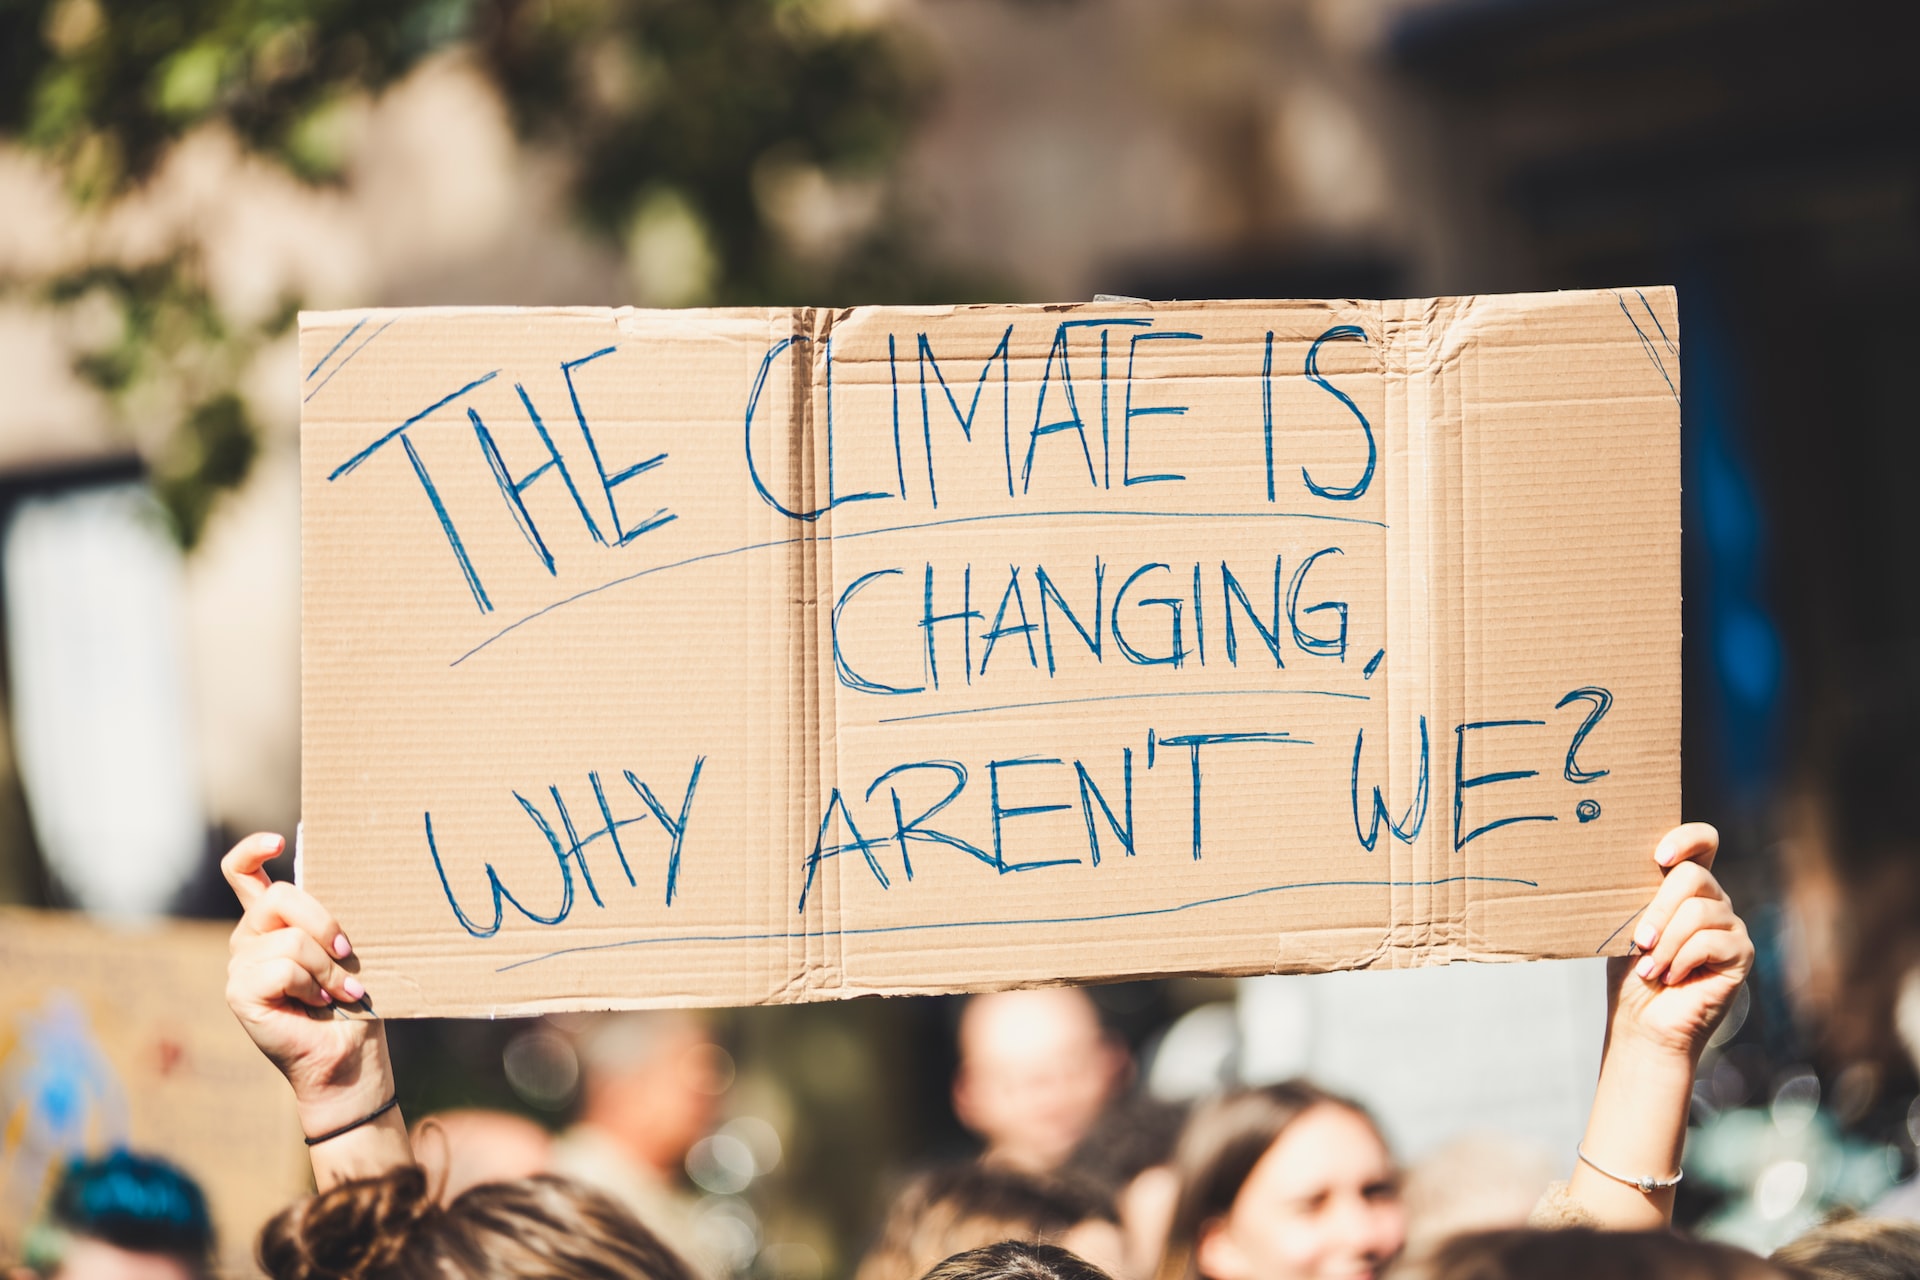 A protester in a crowd raises with both hands a handwritten sign on a brown cardboard about climate change